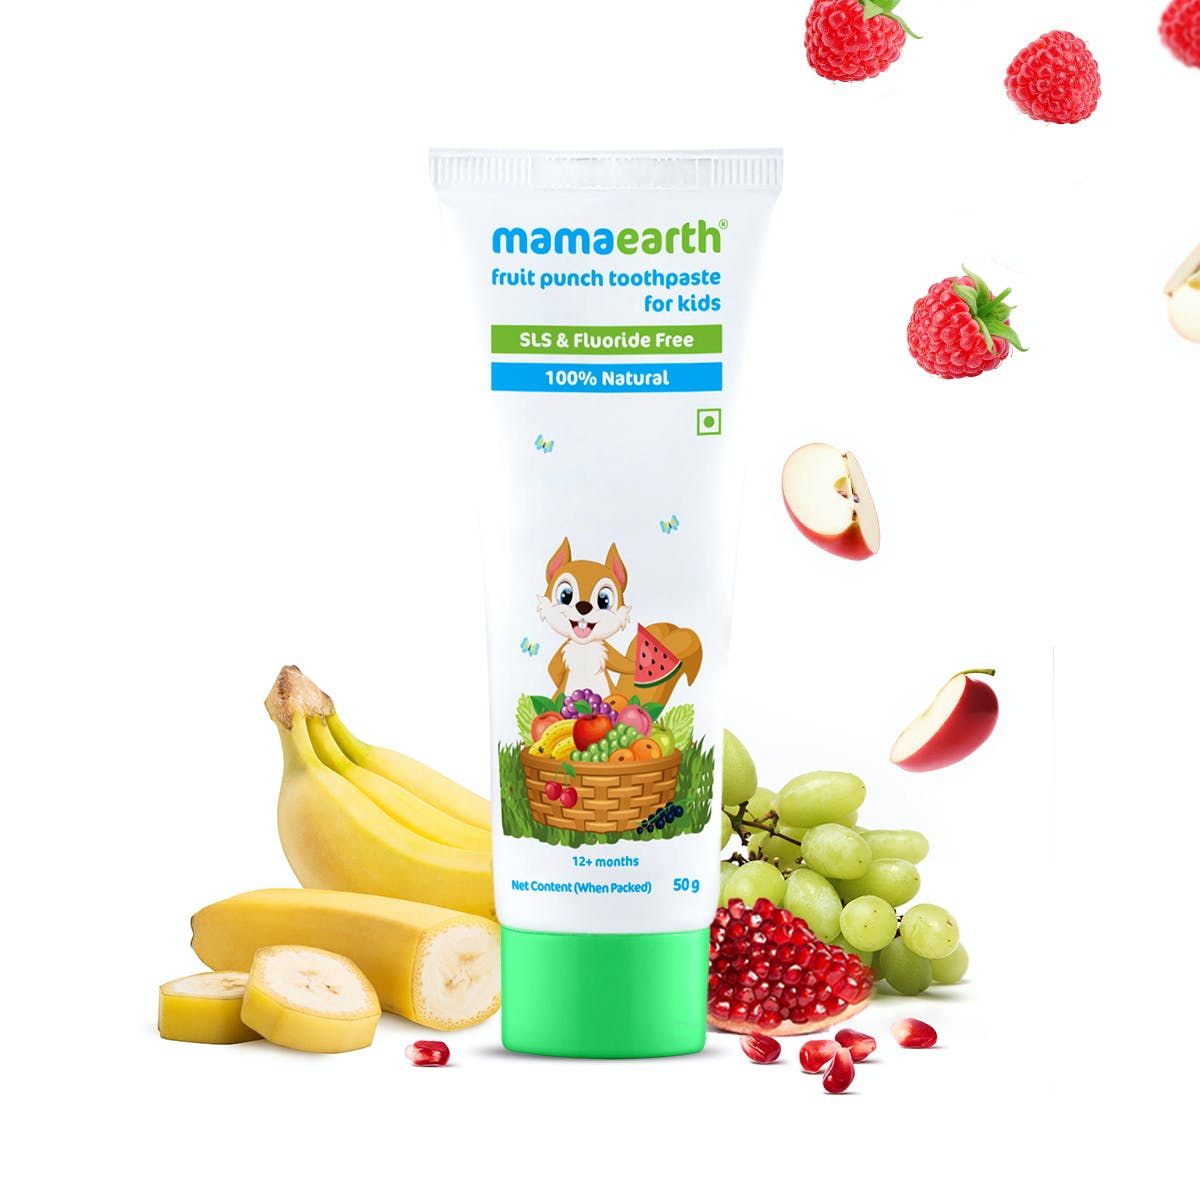 MamaEarth Baby Mamaearth Fruit Punch Toothpaste (50 g) MamaEarth Baby